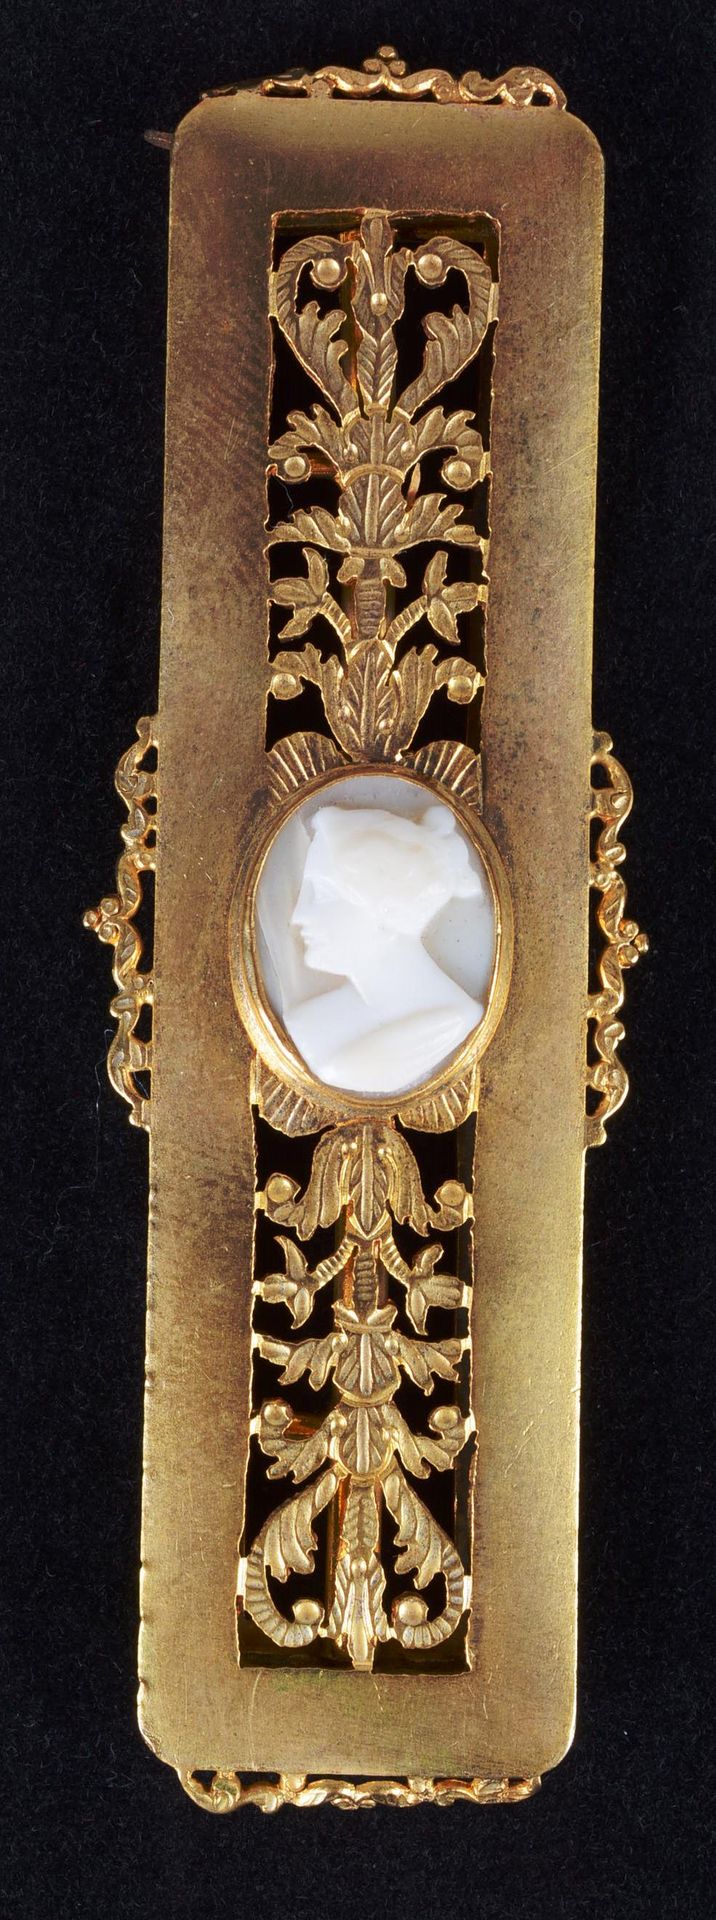 BROCHE CAMÉE Rectangular cameo brooch in pompon.

It is adorned with a cameo eng&hellip;